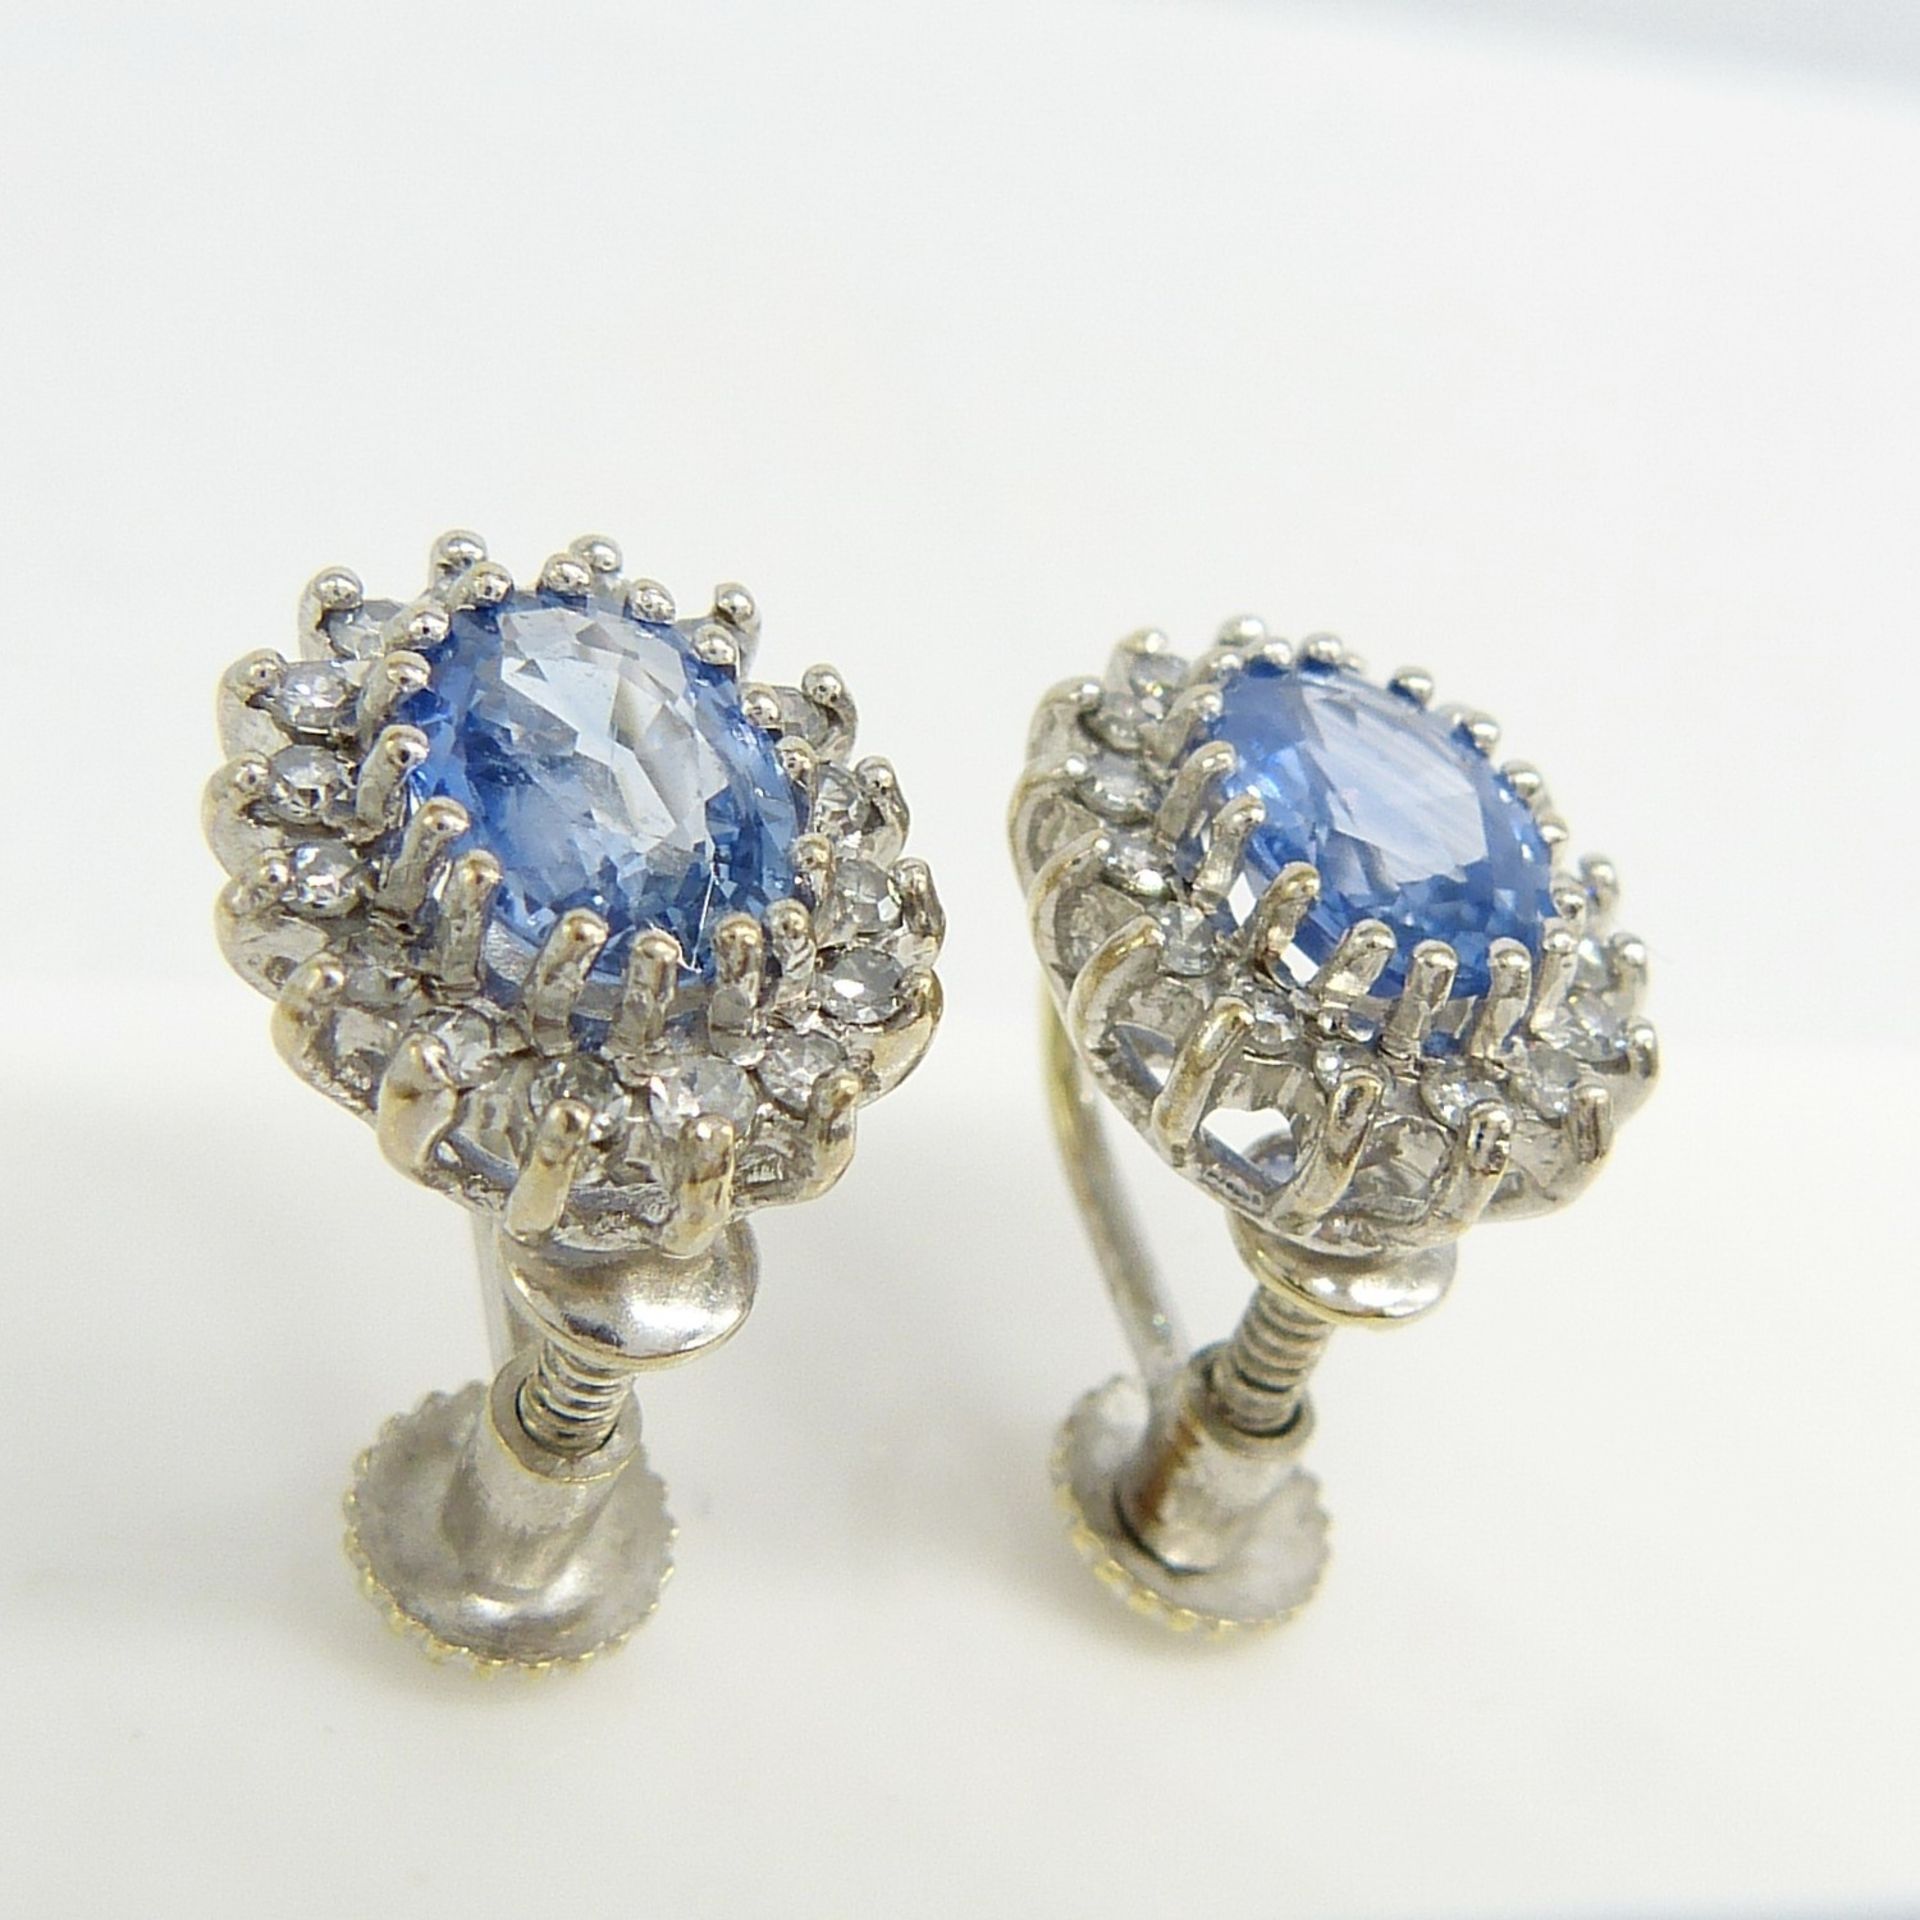 Vintage Pair of Cornflower Blue Sapphire and Diamond Ear Studs With Screw Back Clip On Fittings - Image 2 of 7